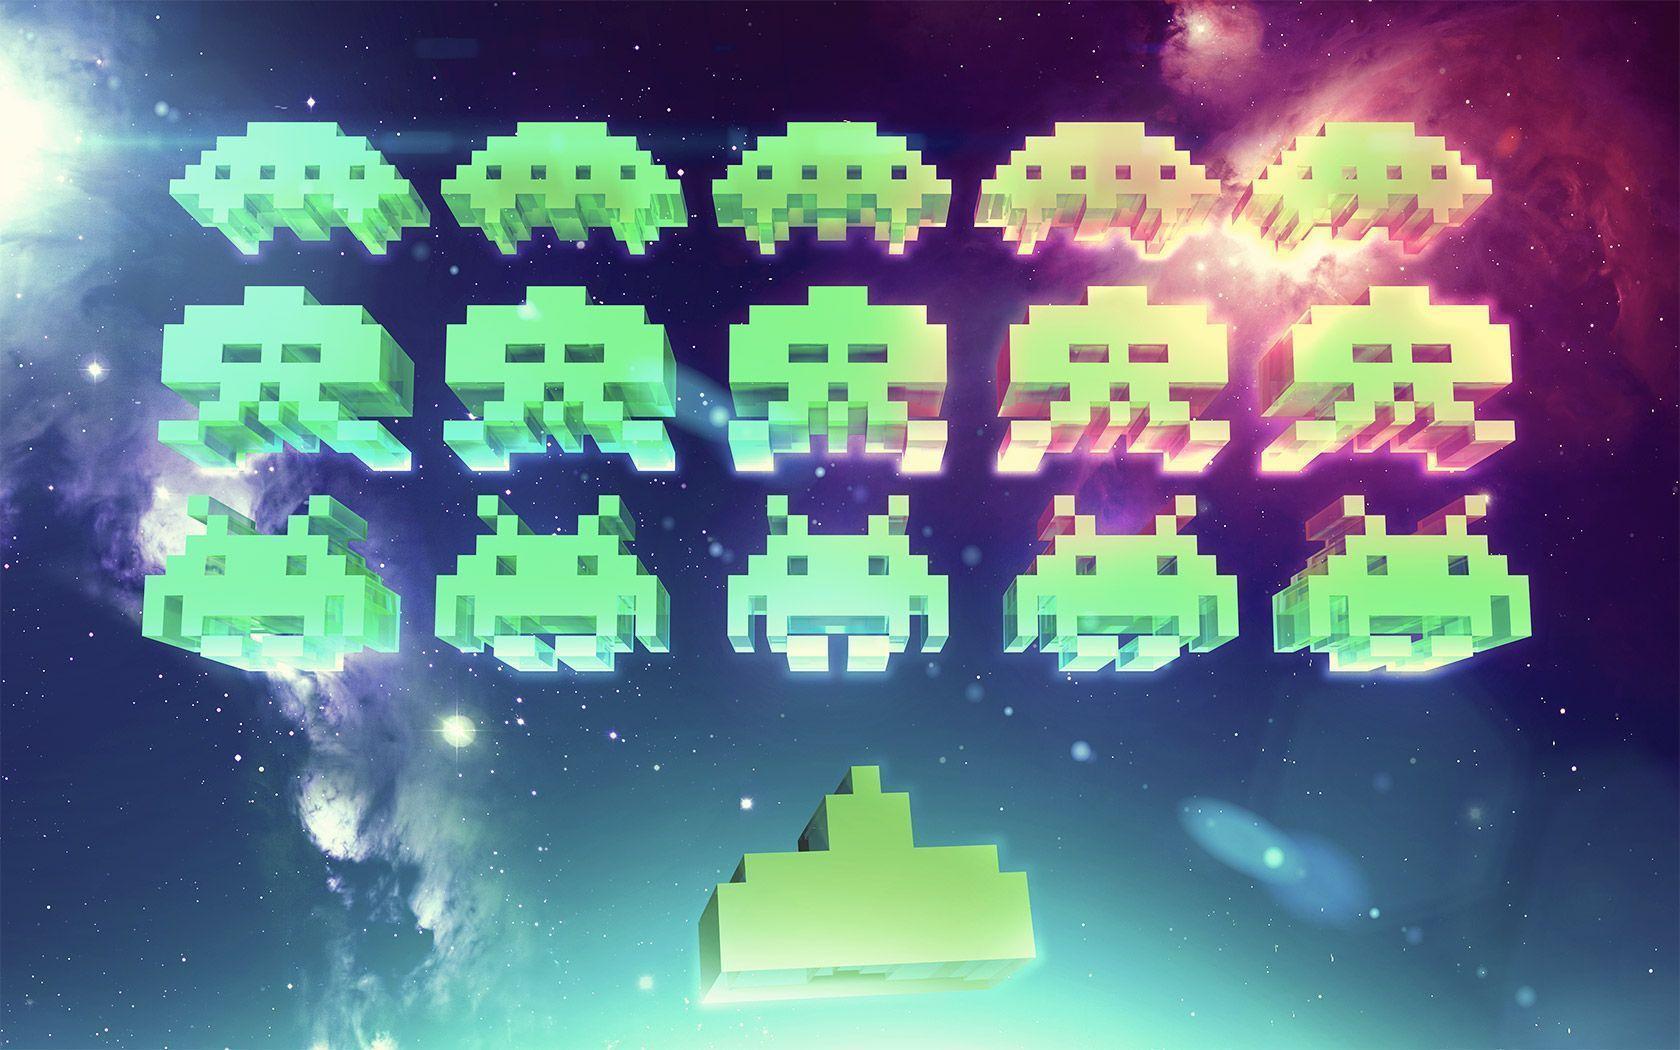 Hey R Gaming, Just Finished This Space Invaders Wallpaper. What Do